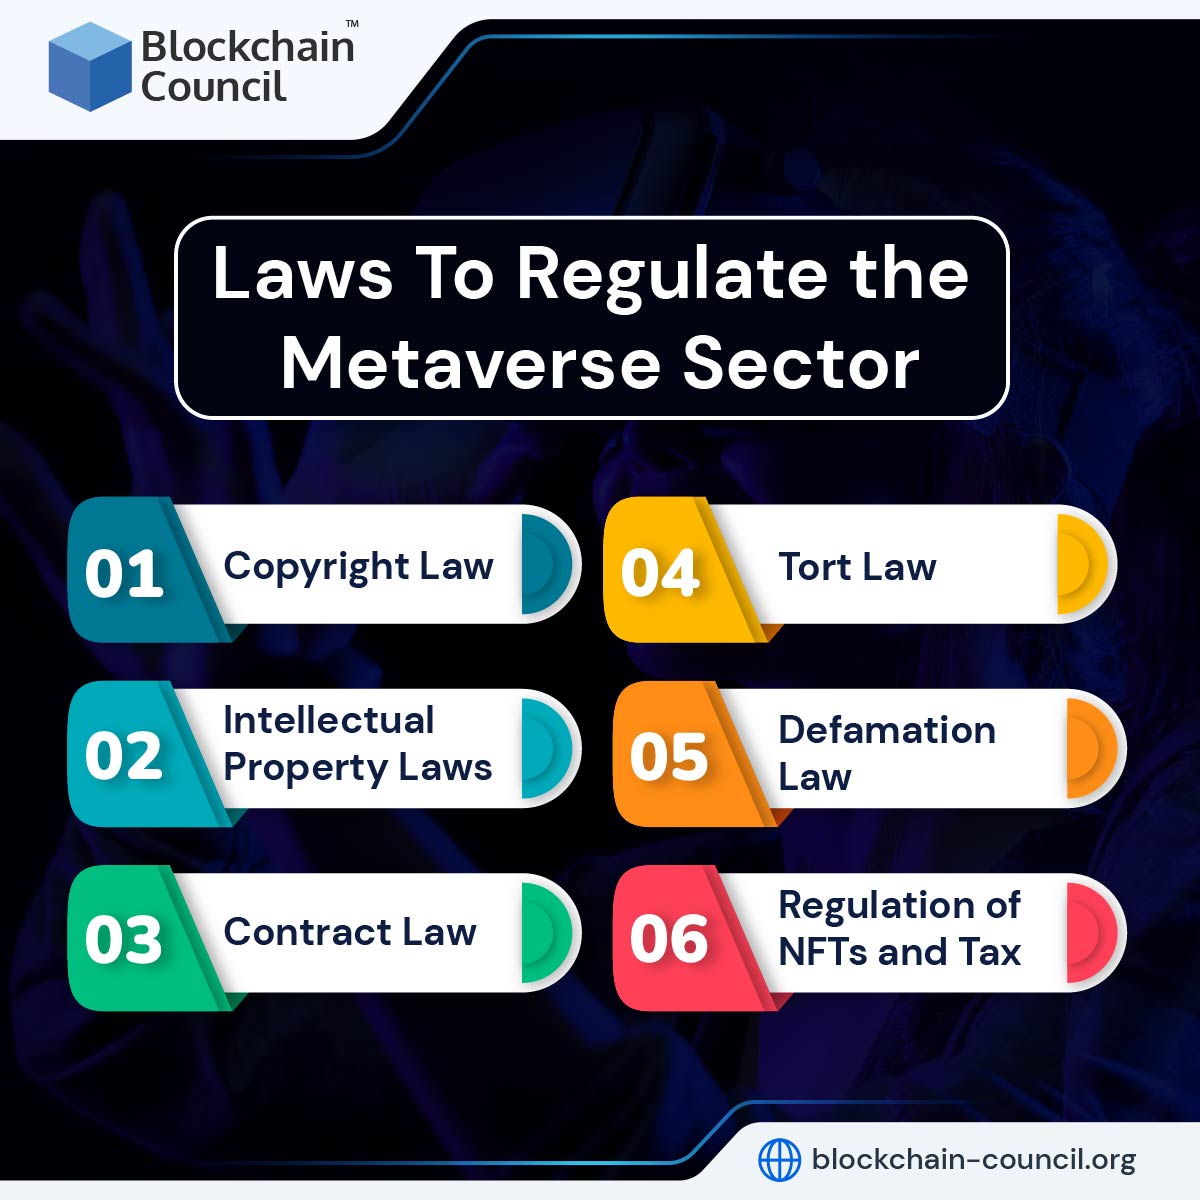 Laws To Regulate the Metaverse Sector